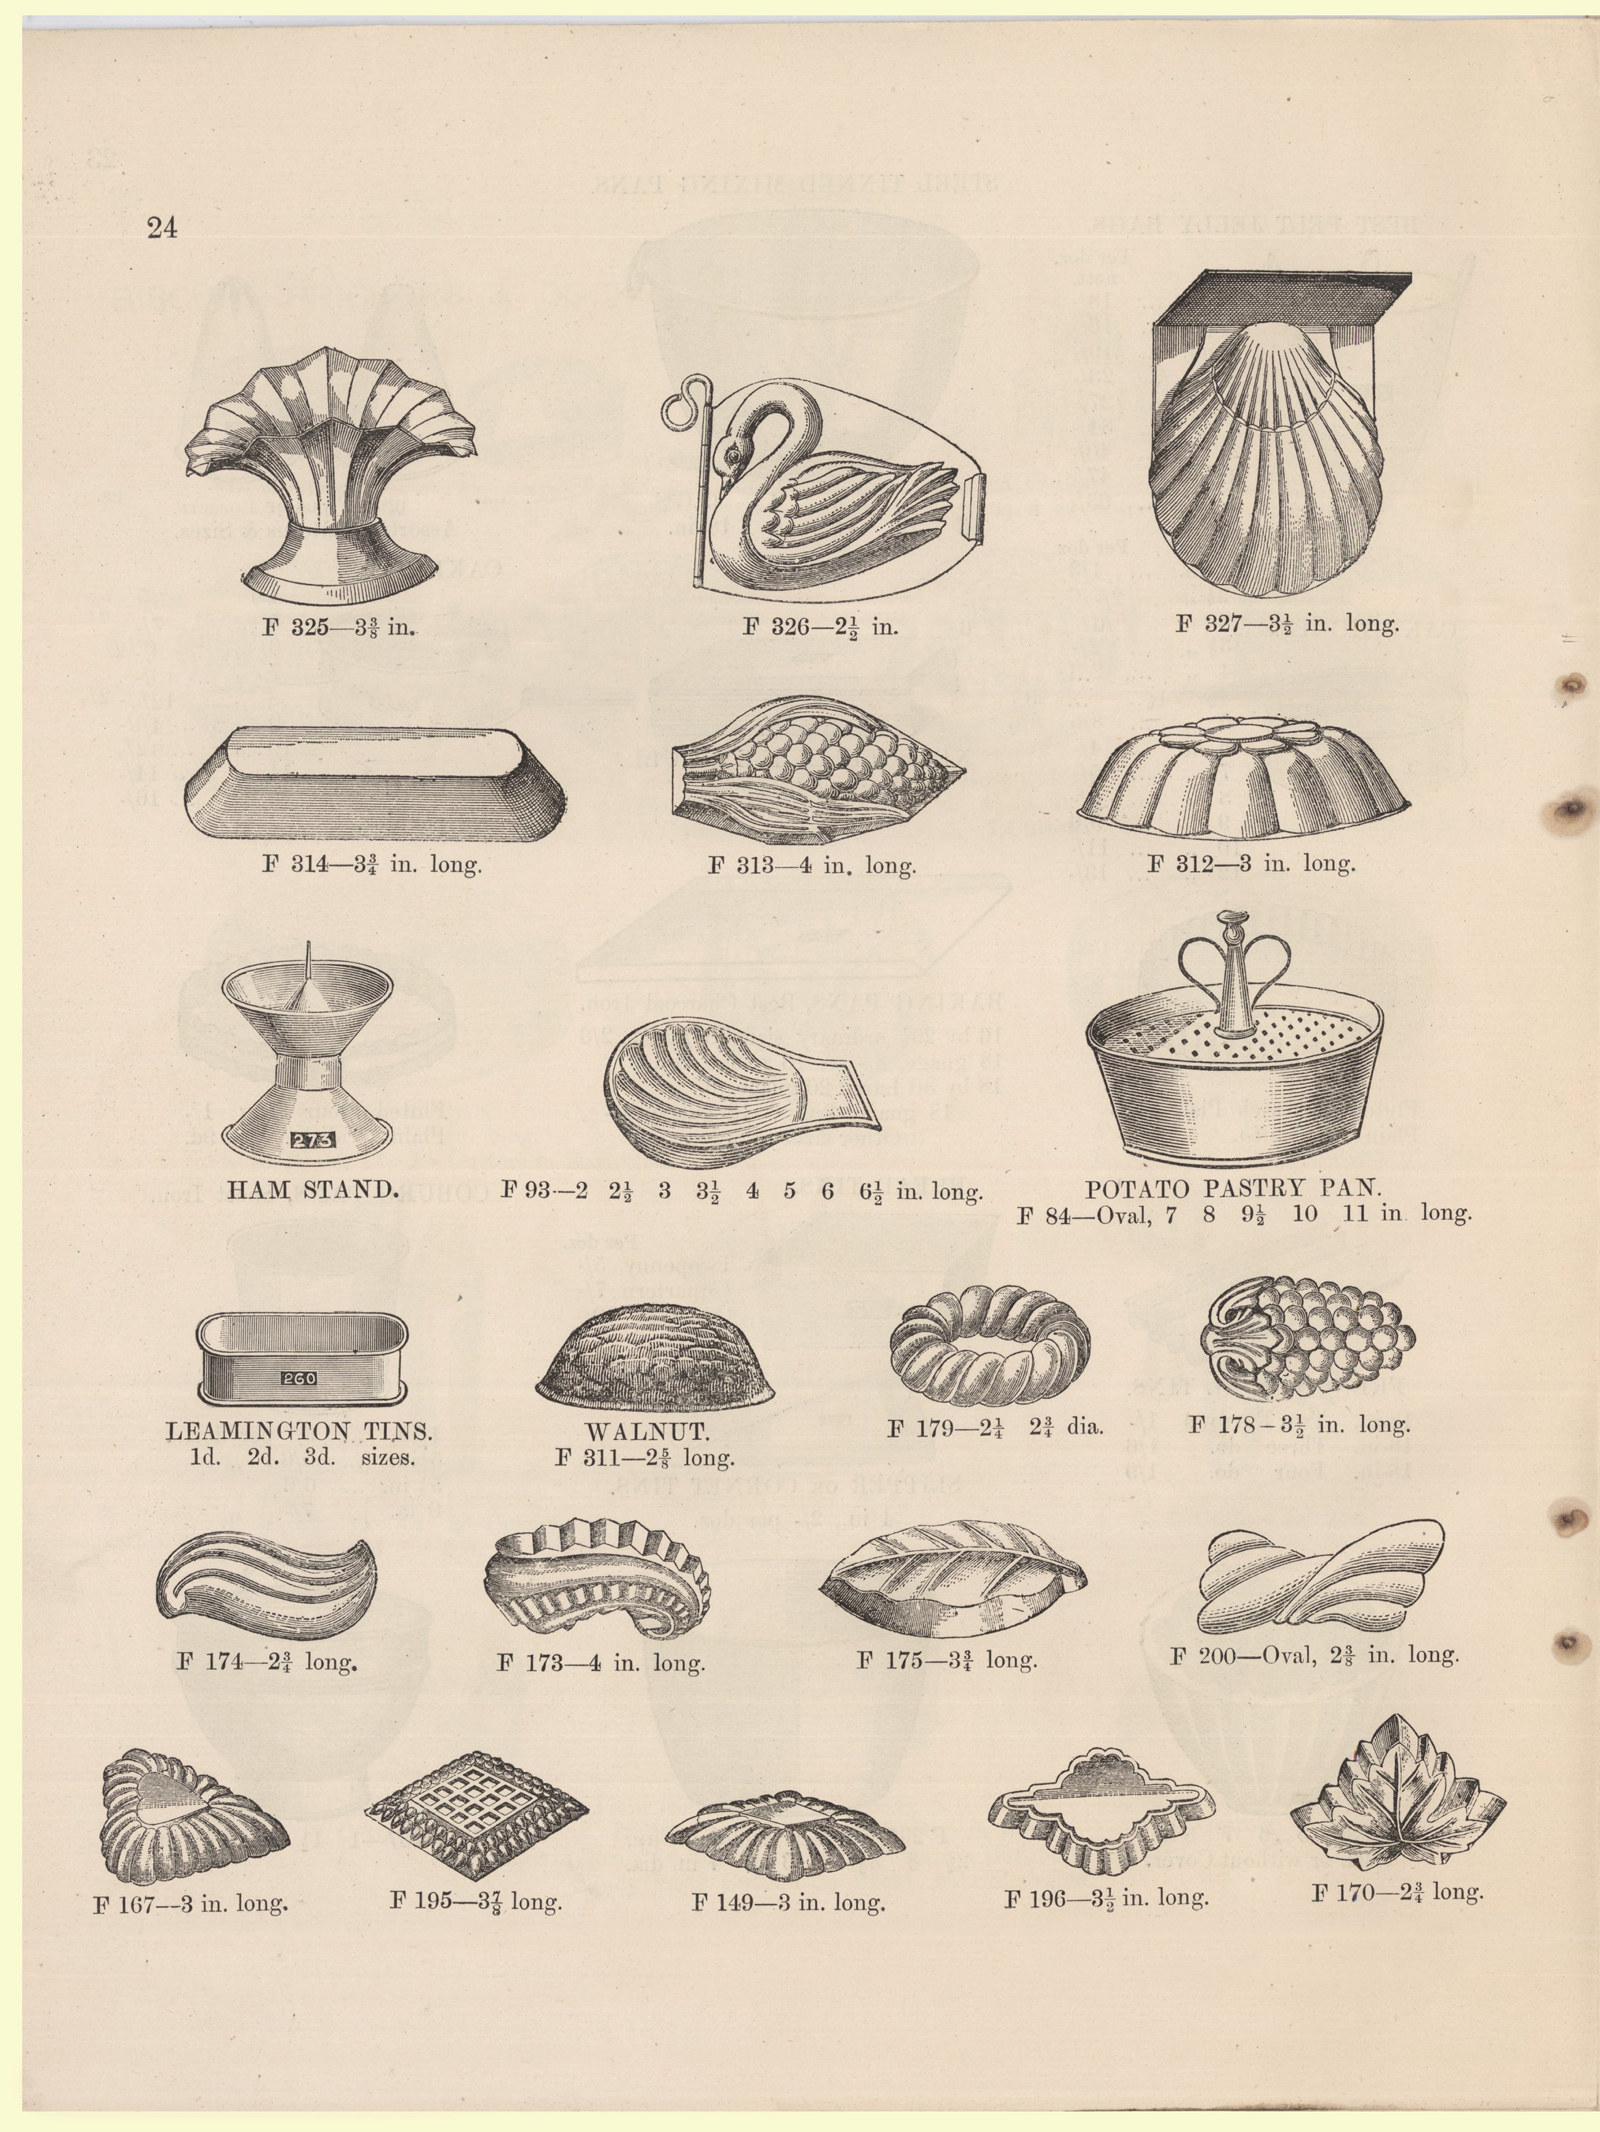 Page from book showing twenty-one different mould shapes.